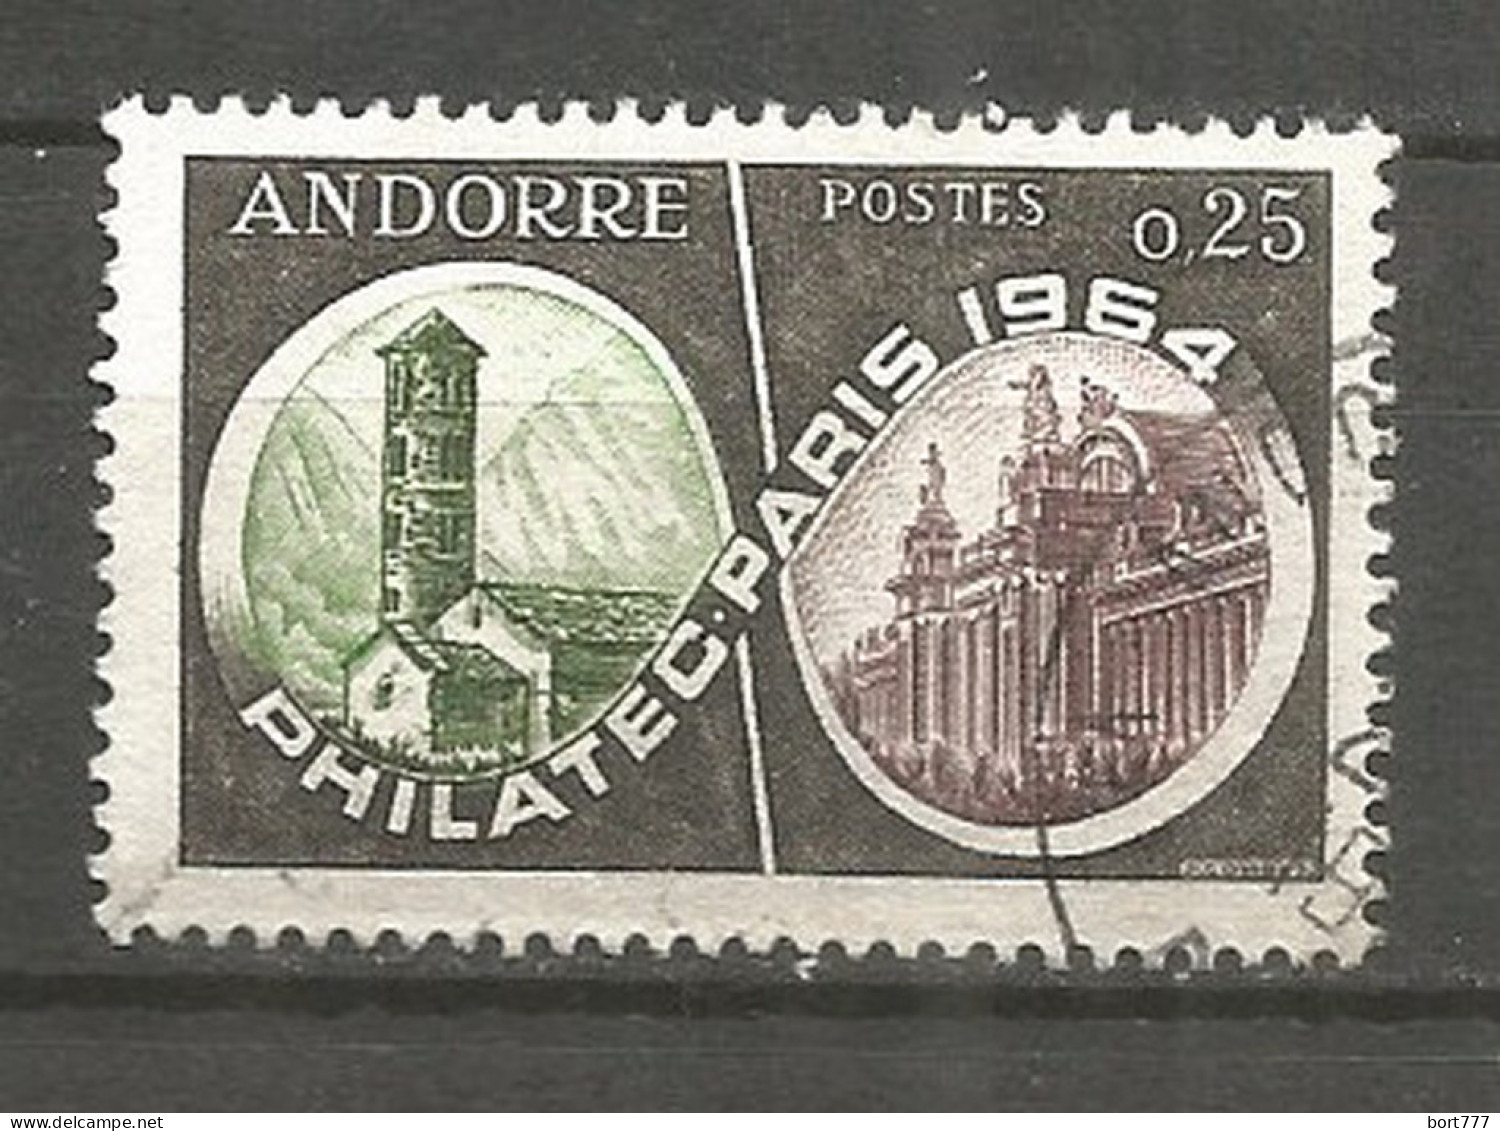 French Andorra 1964 , Used Stamp  - Used Stamps